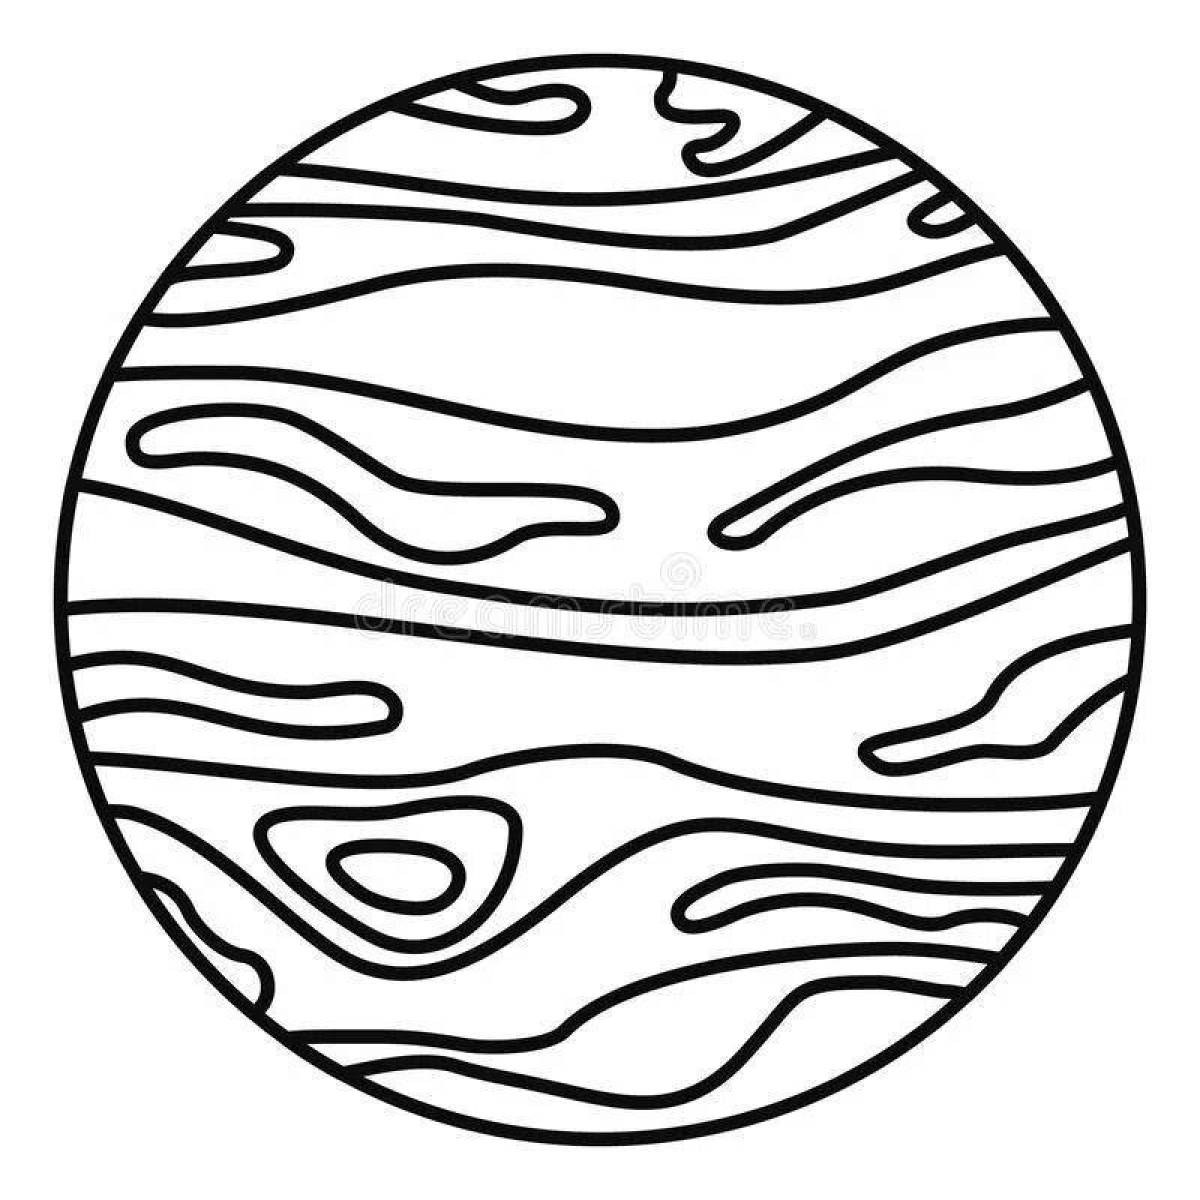 Jupiter coloring page with colorful engraving